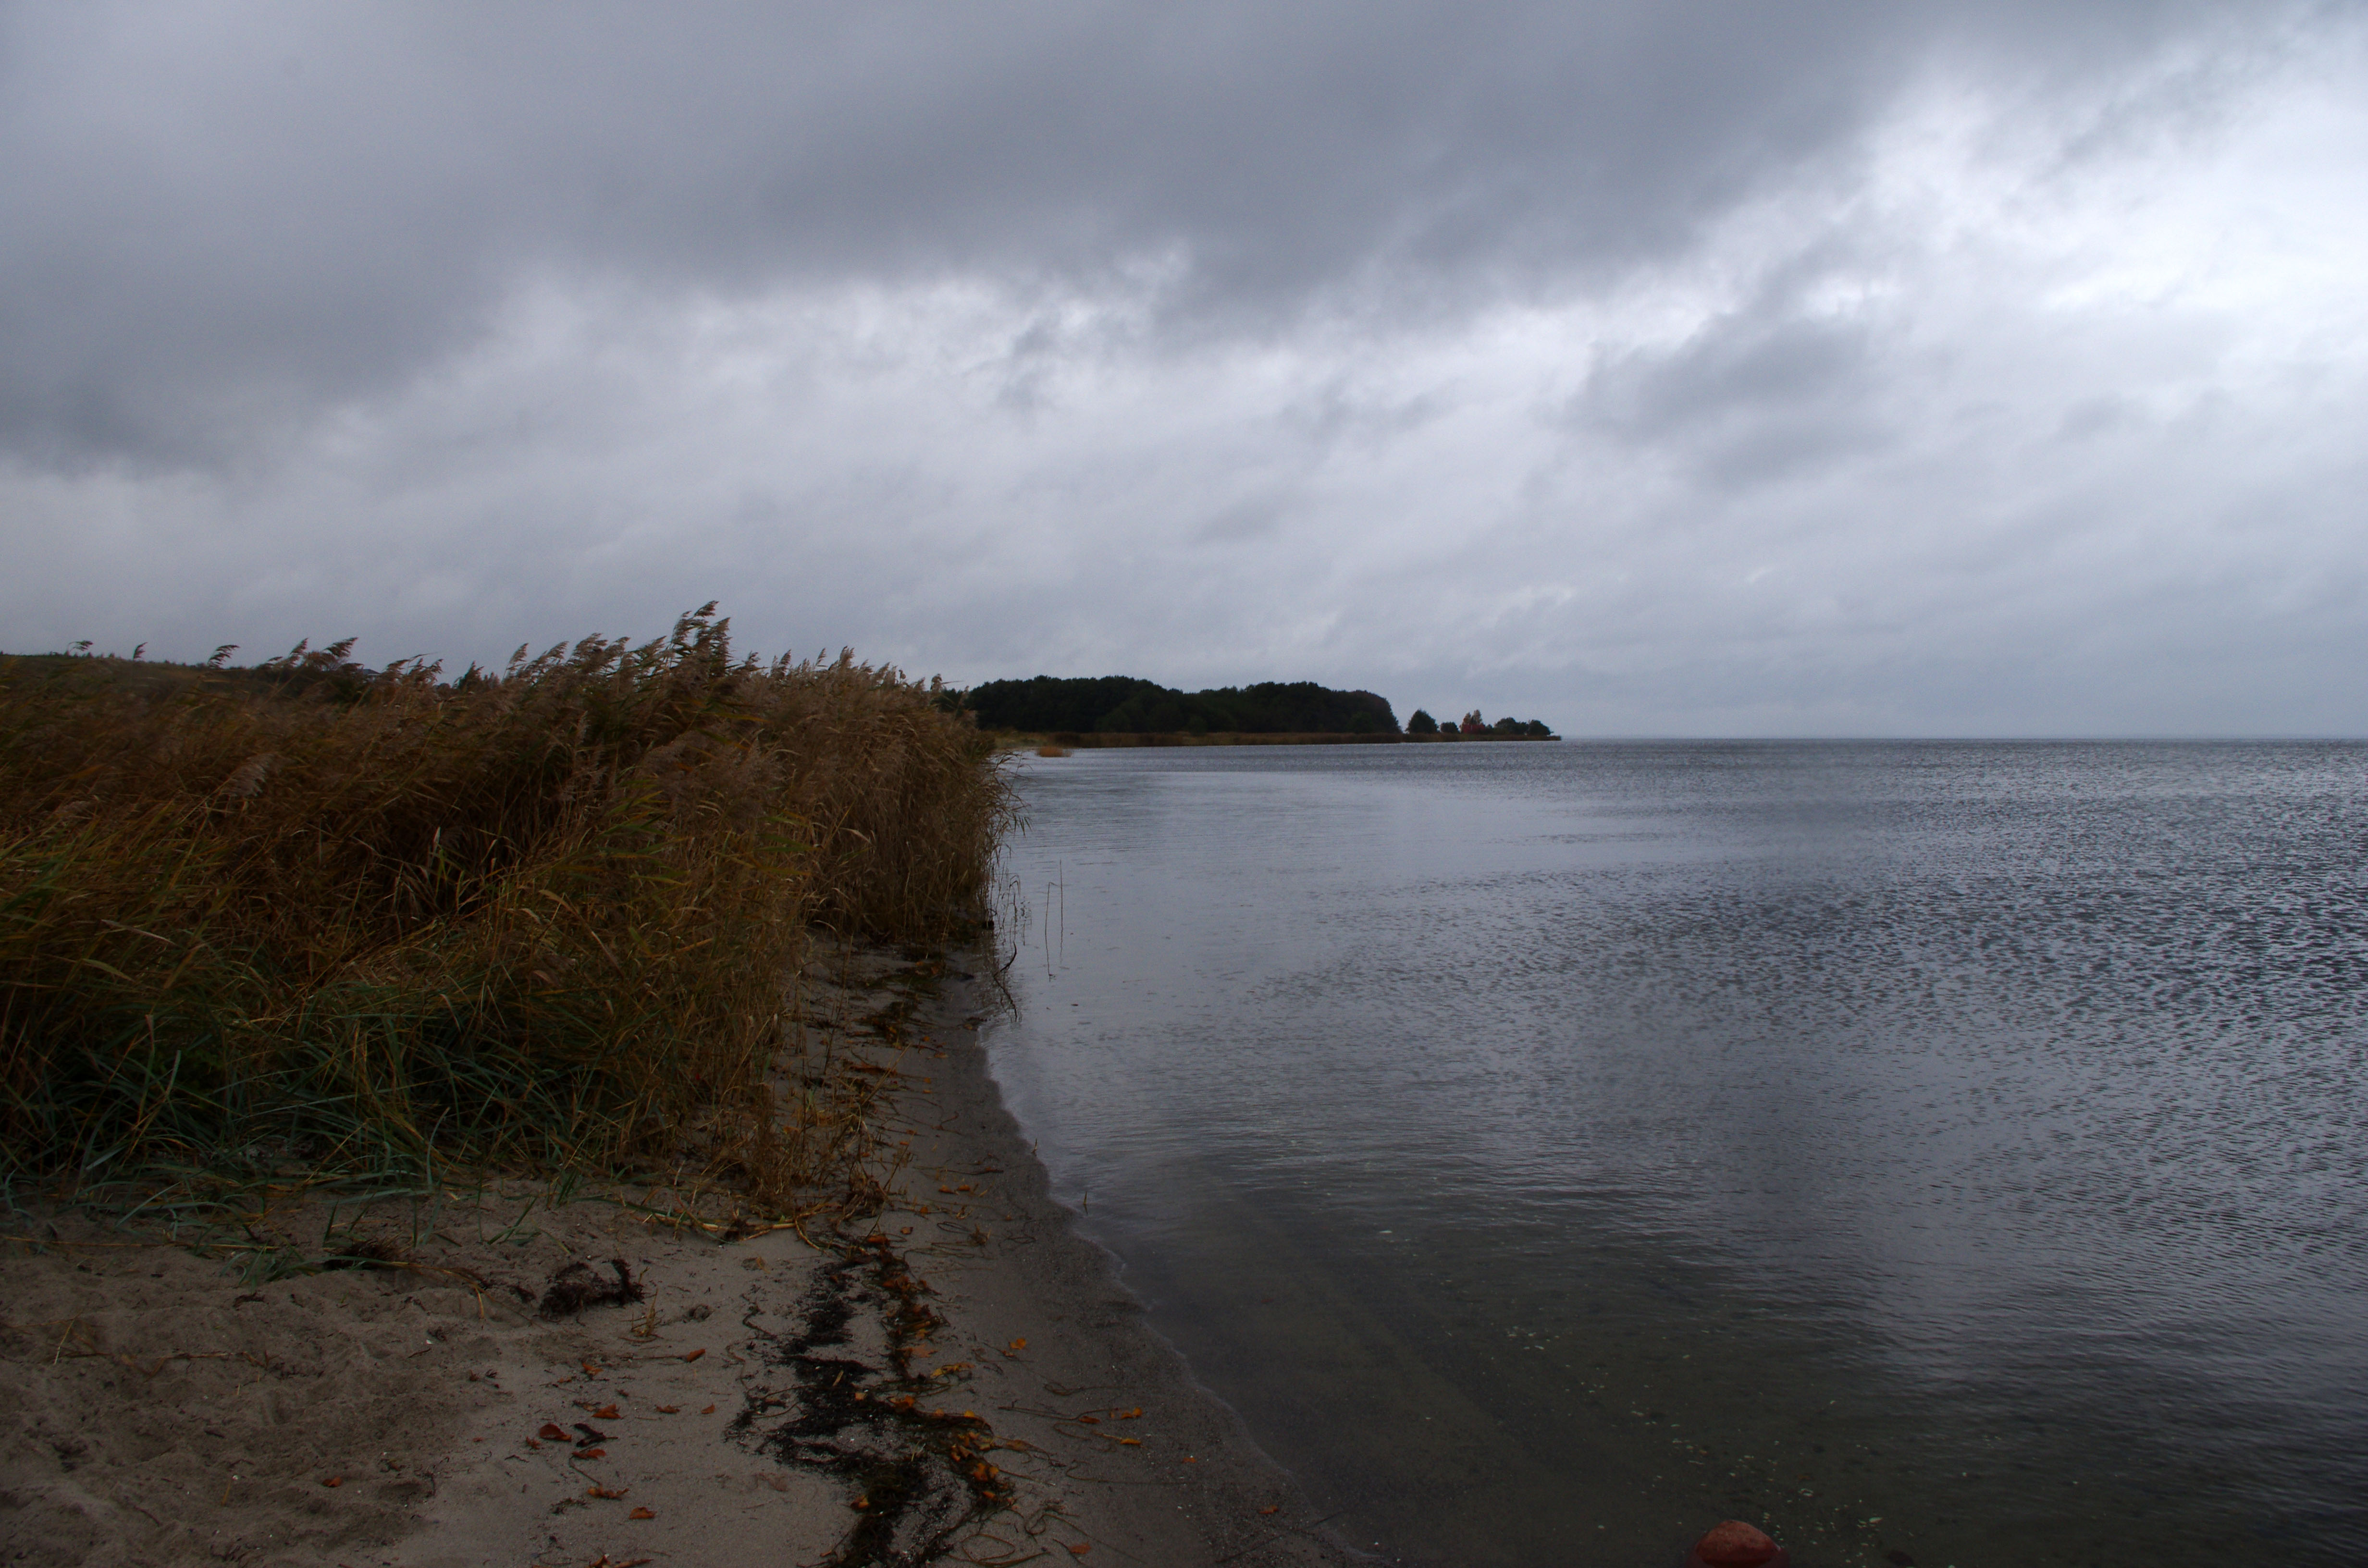 The photo shows the beach overgrown with reeds bordering on a large shallow bay belonging to the Baltic Sea.